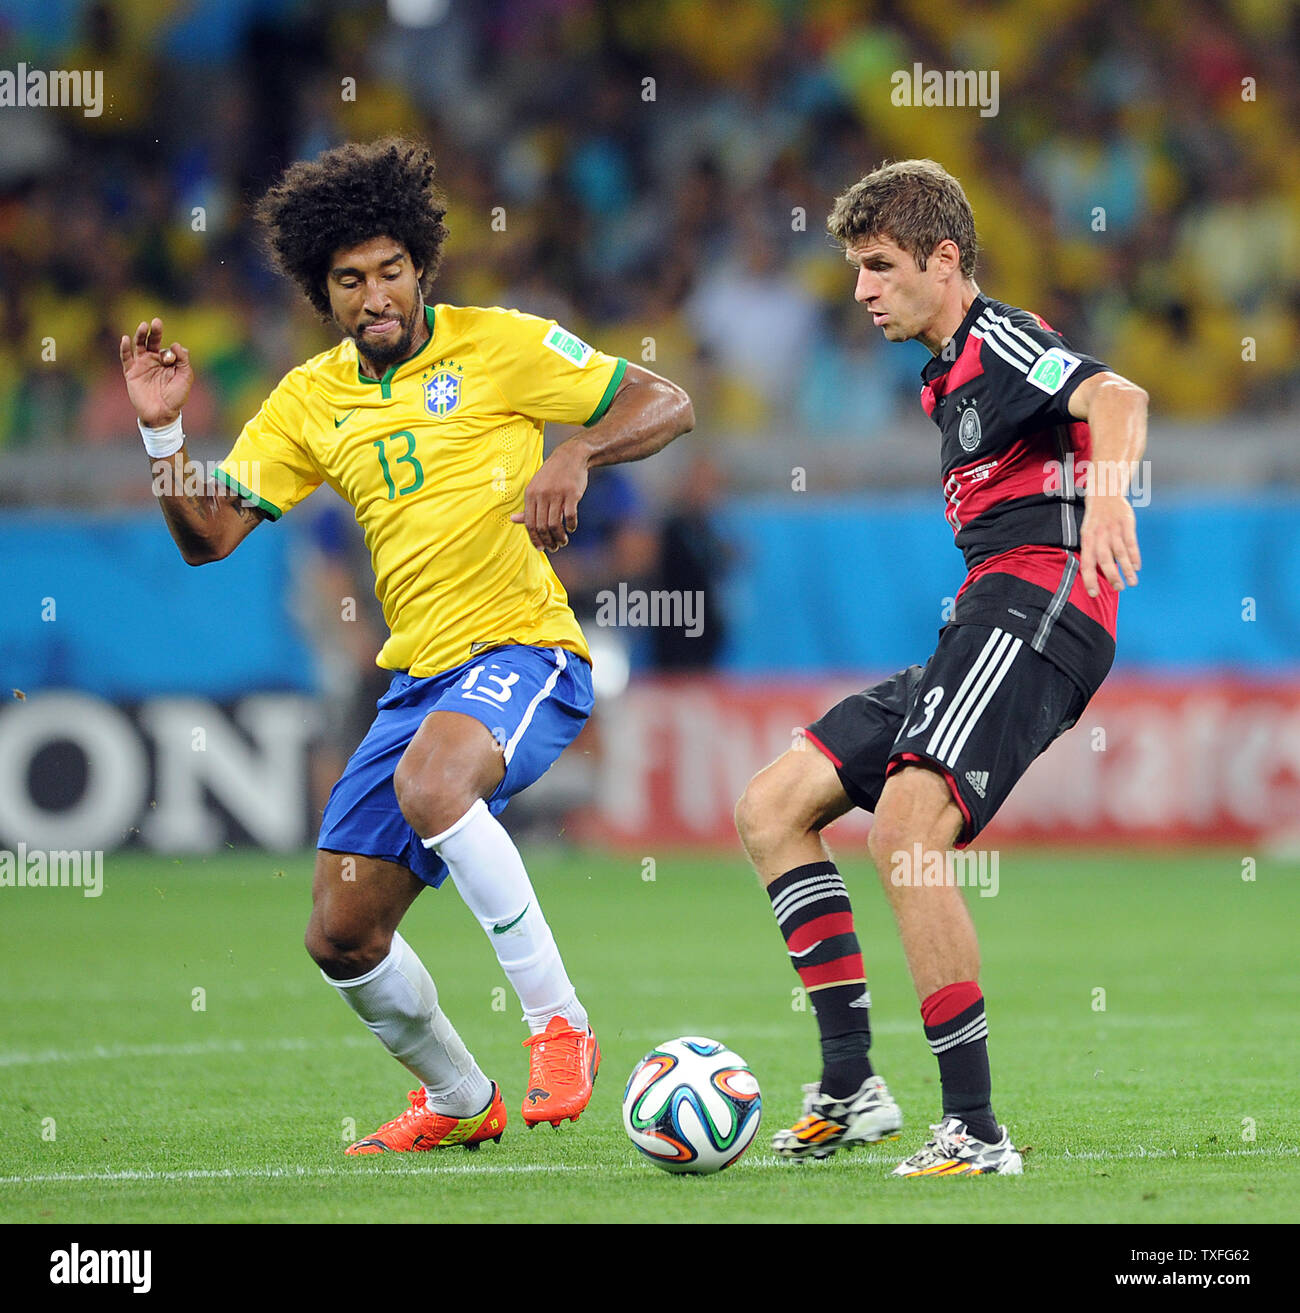 Dante (L) of Brazil competes with Thomas Muller of Germany during the 2014 FIFA World Cup Semi Final match at the Estadio Mineirao in Belo Horizonte, Brazil on July 08, 2014. UPI/Chris Brunskill Stock Photo